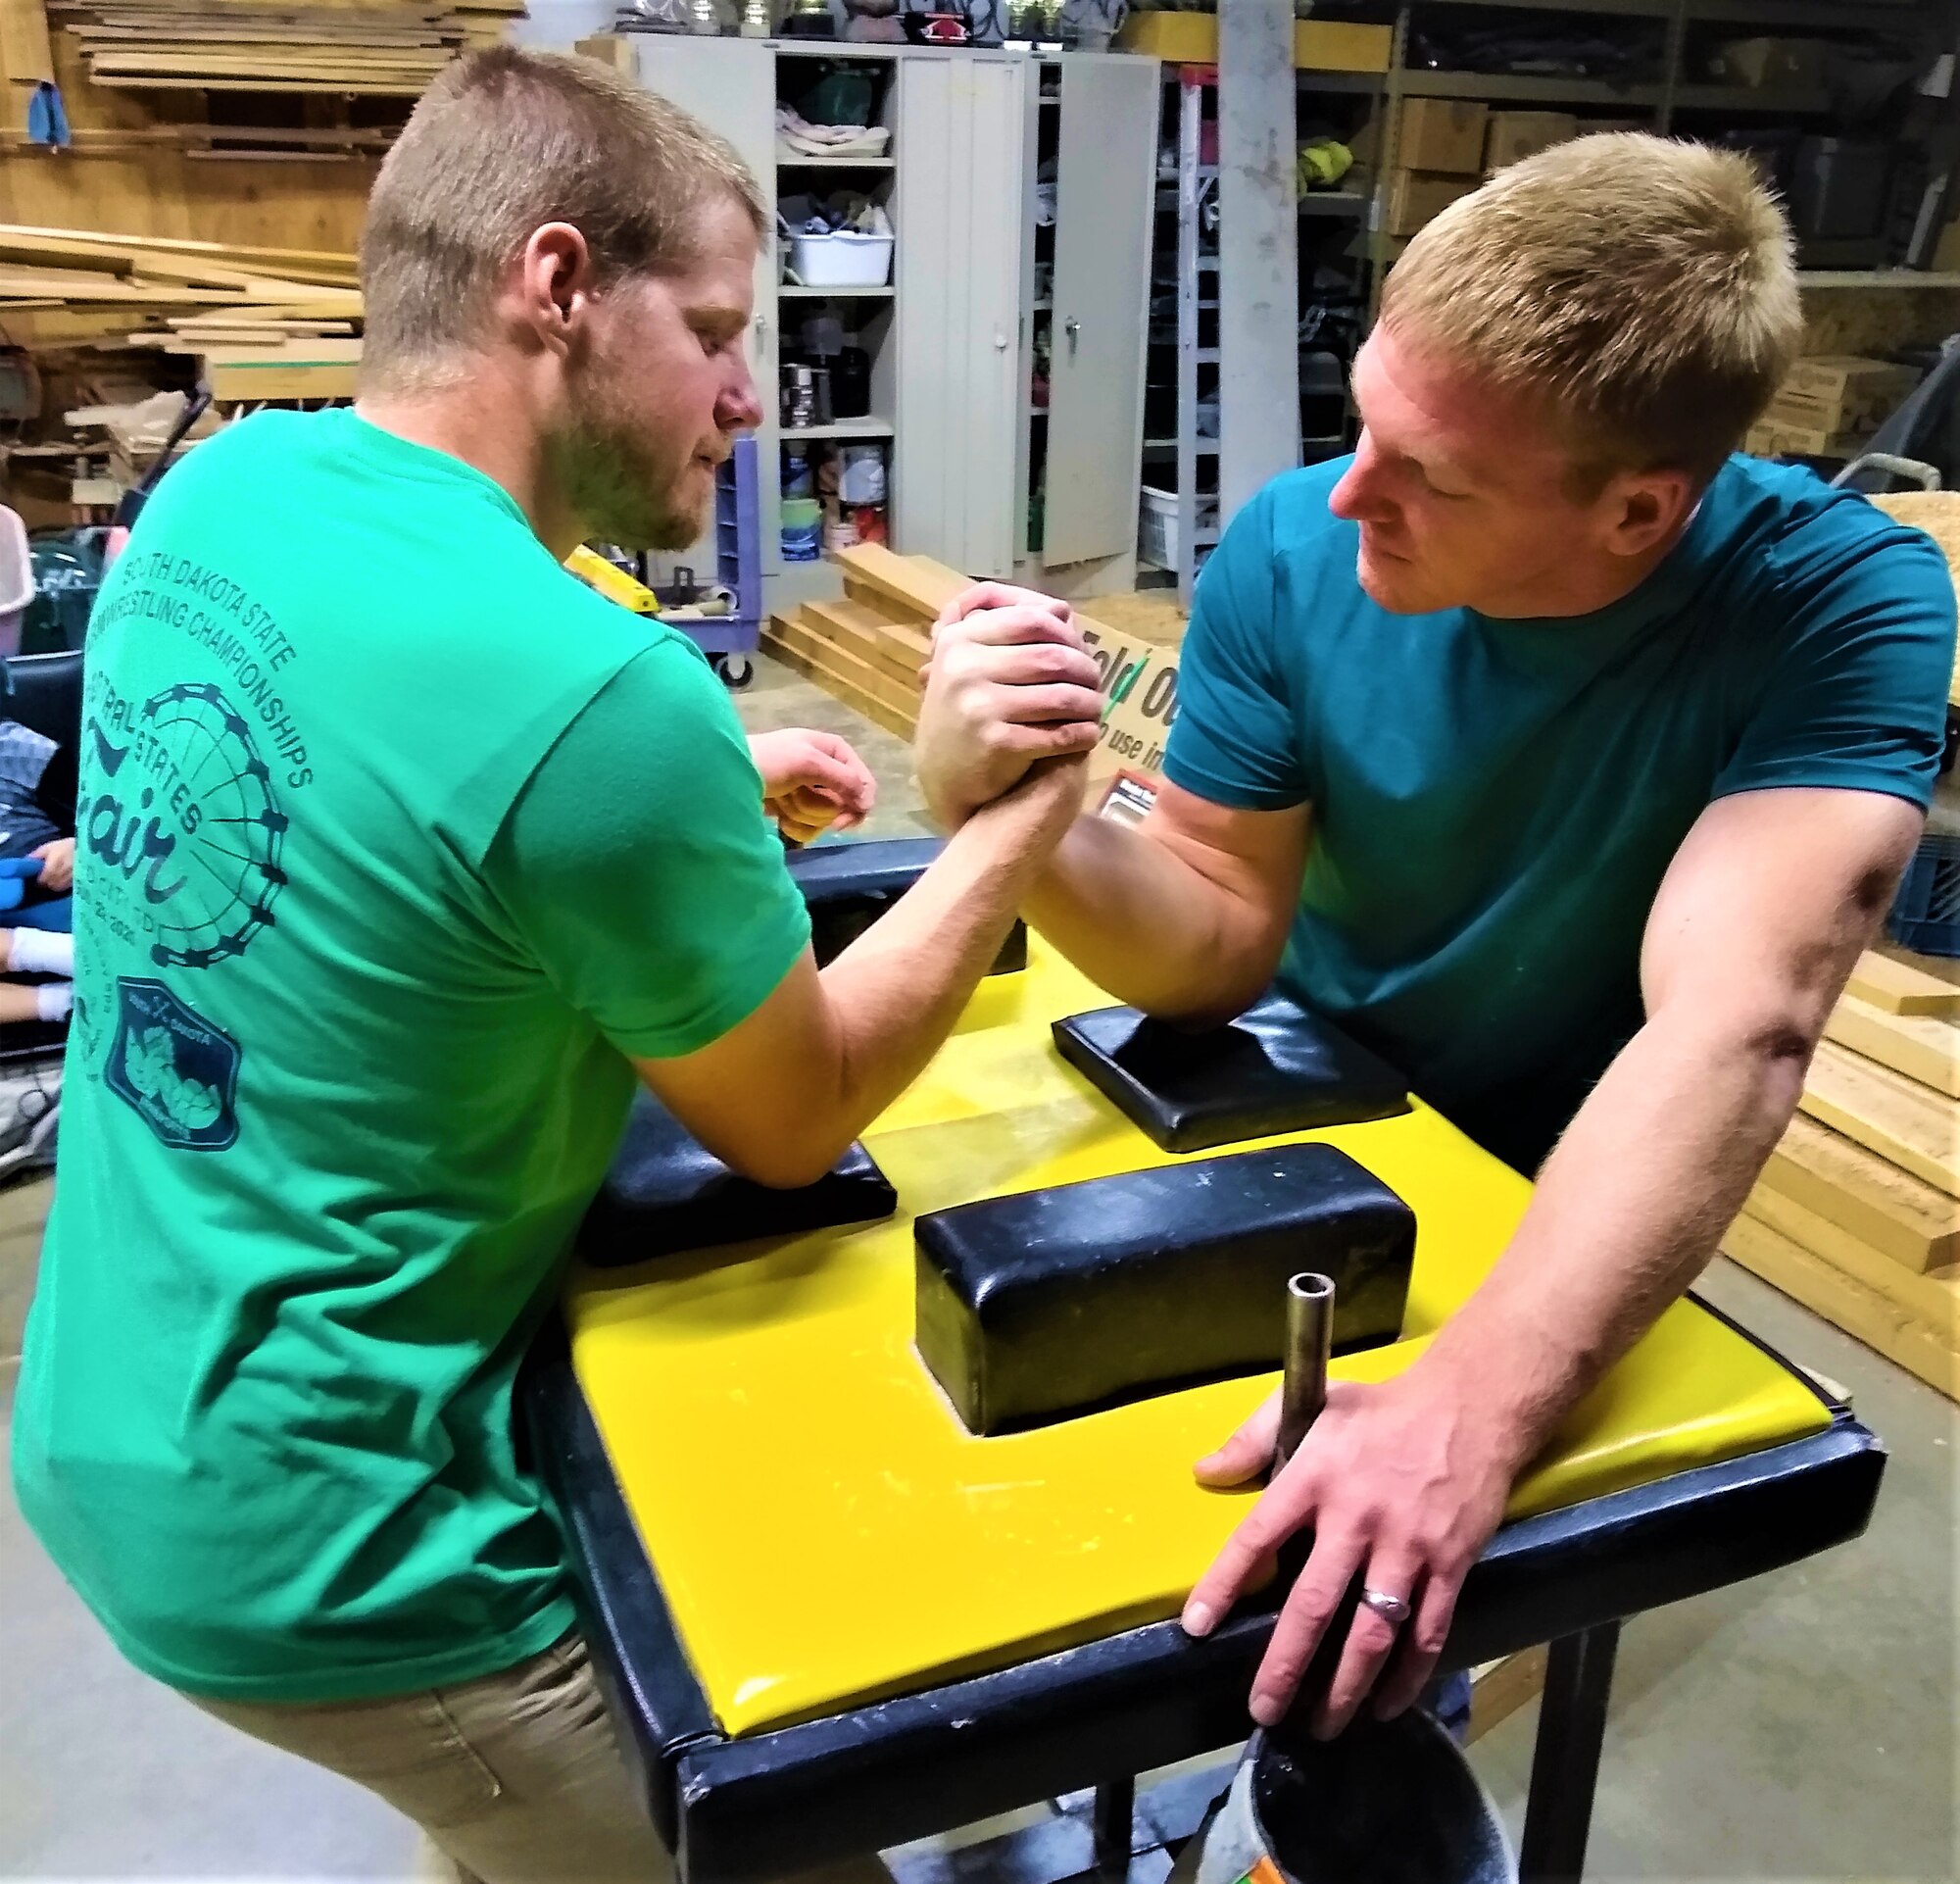 Team Hill employees Lincoln Jarman (left) and 1st Lt. Chad Wanner arm wrestling during a training session Oct. 1 in Logan, Utah. Wanner is a seasoned veteran, with 16 years of experience in competitive arm wrestling, while Jarman has just one year under his belt.